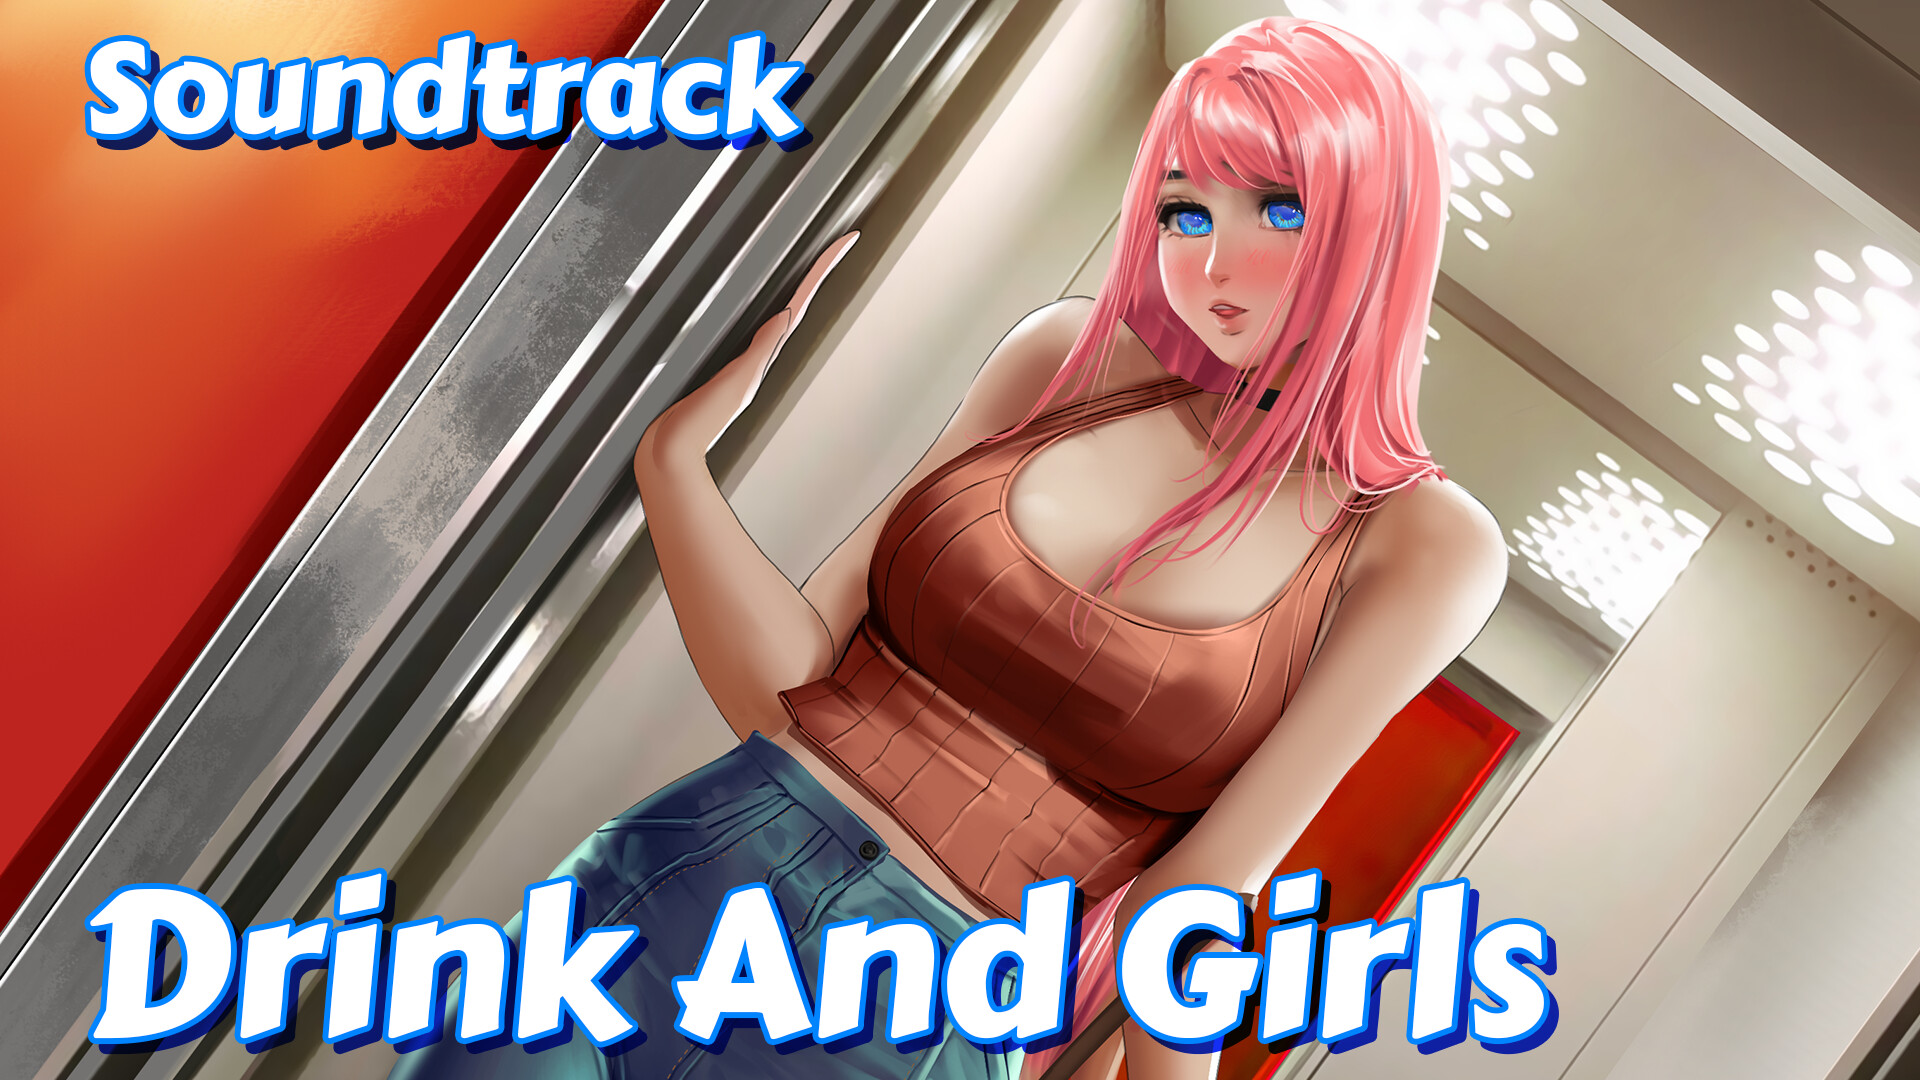 Drink And Girls Soundtrack Featured Screenshot #1